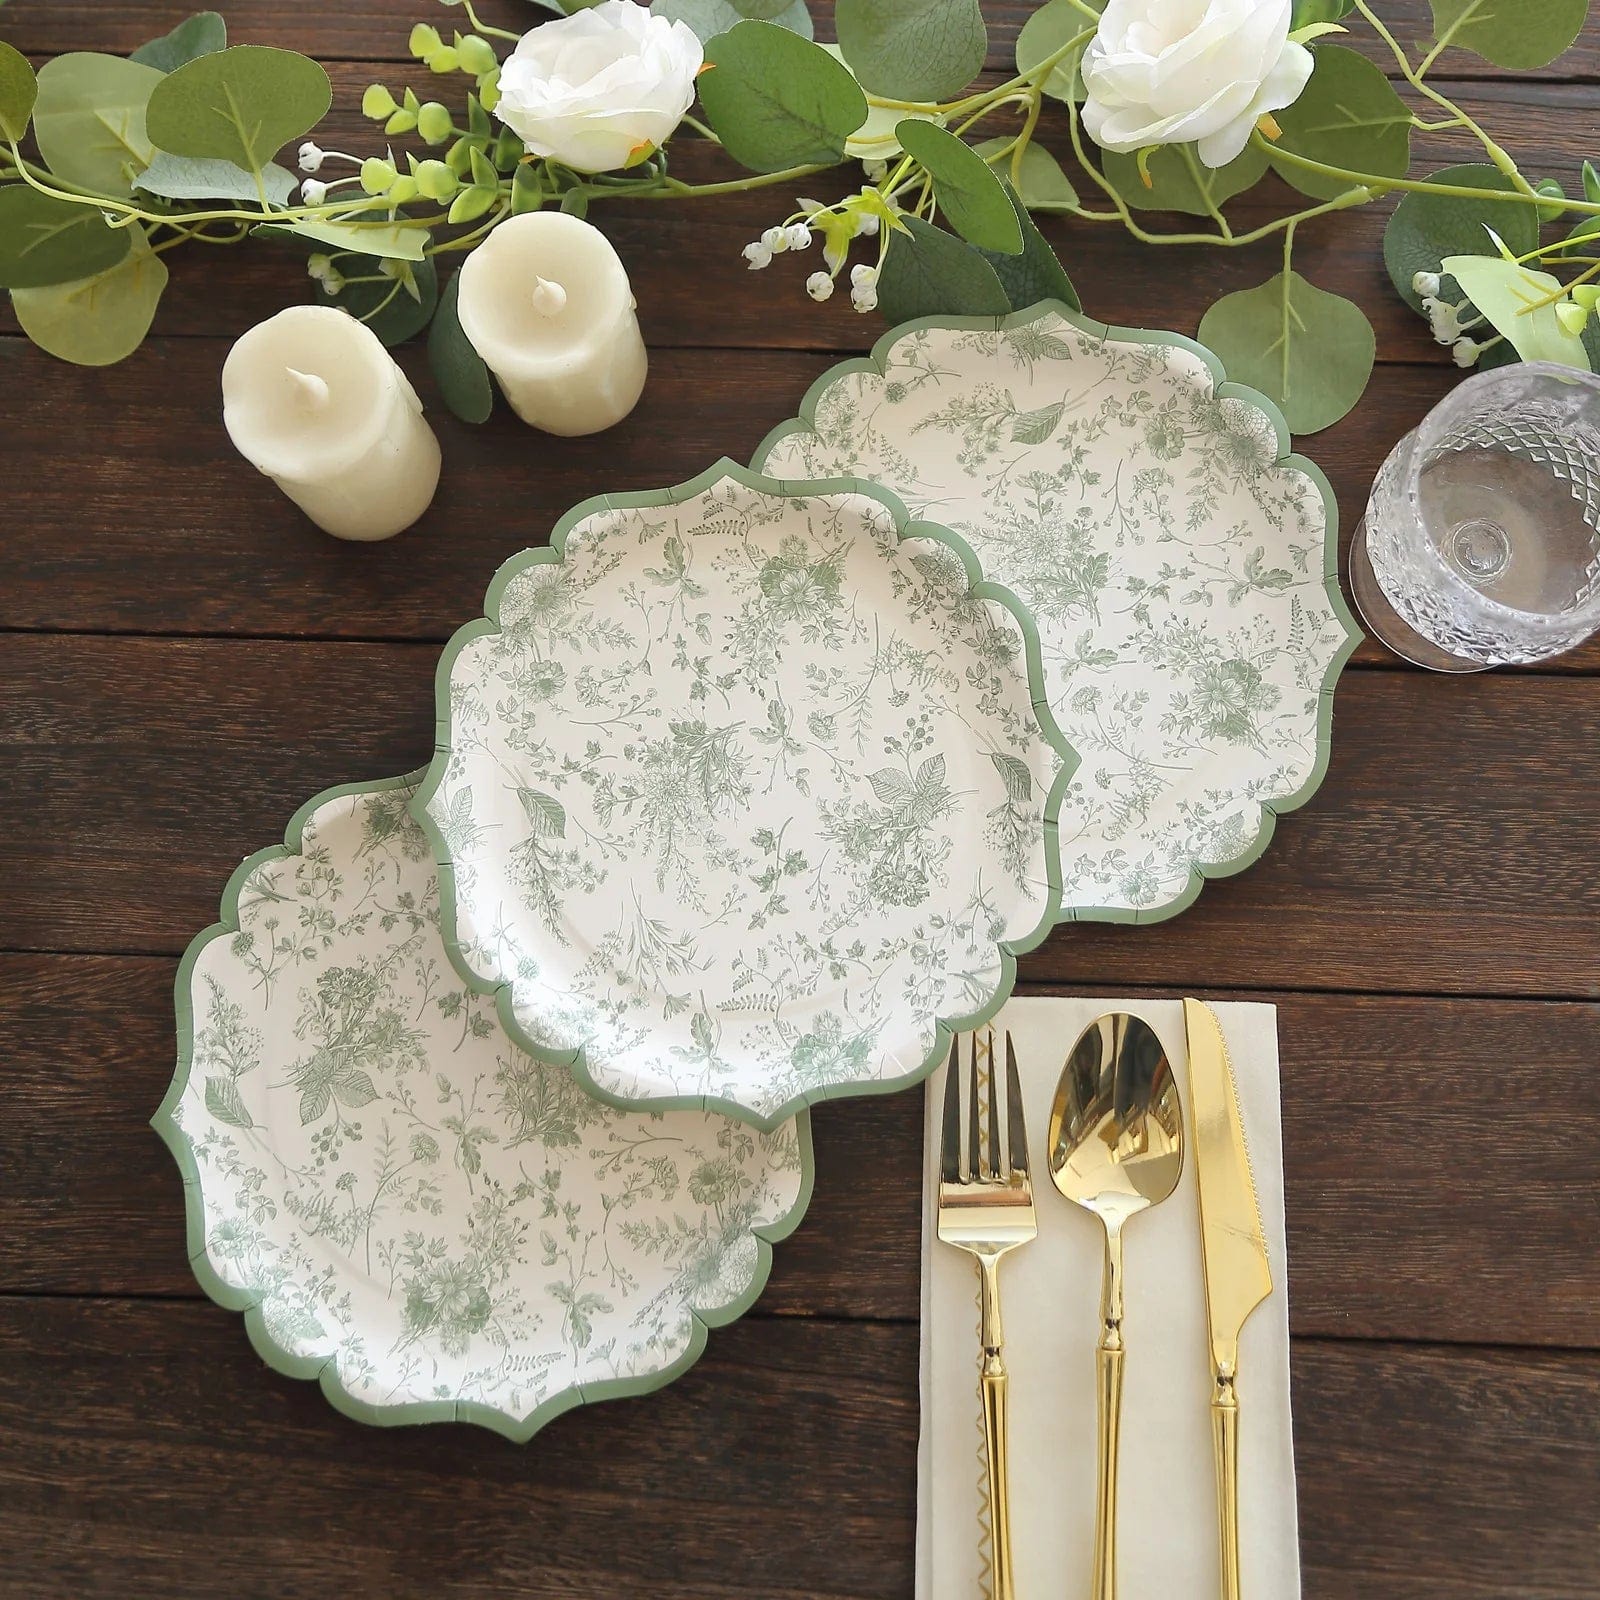 25 White Disposable Paper Plates with Sage Green Floral Leaves Print and Scalloped Rim